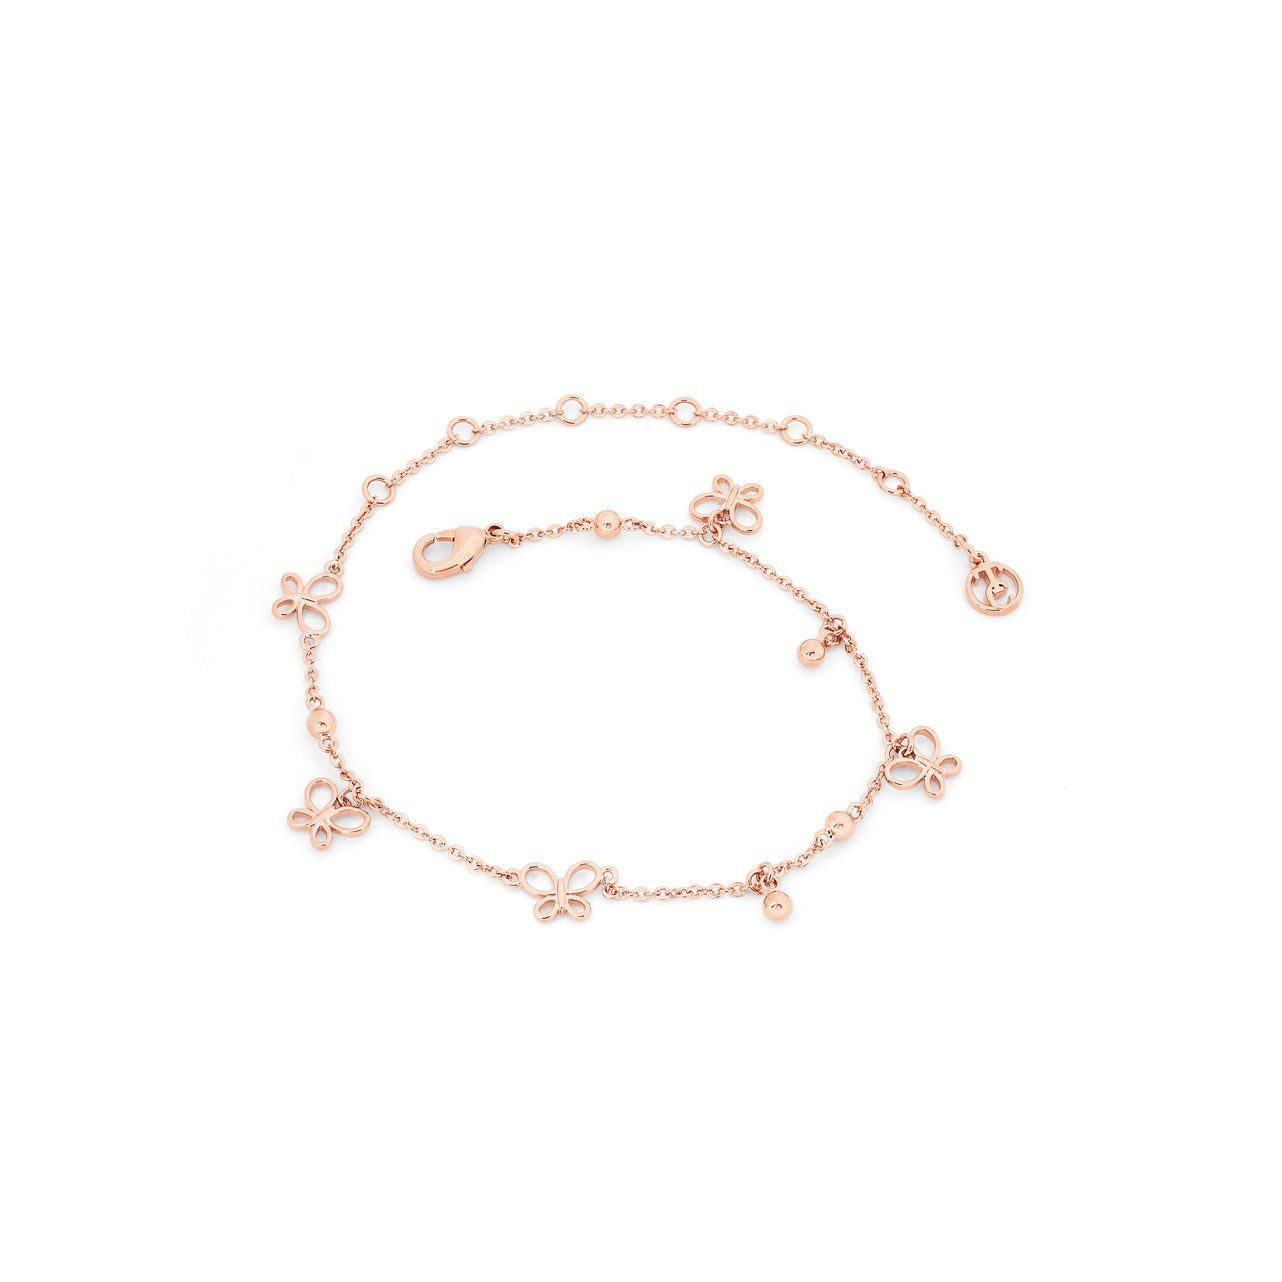 Tipperary Crystal Butterfly Rose Gold Charm Bracelet  Drawing inspiration from urban garden, the Tipperary Crystal Butterfly collection transforms an icon into something modern and unexpected. Playful and elegant, this collection draws from the inherent beauty of the butterfly.